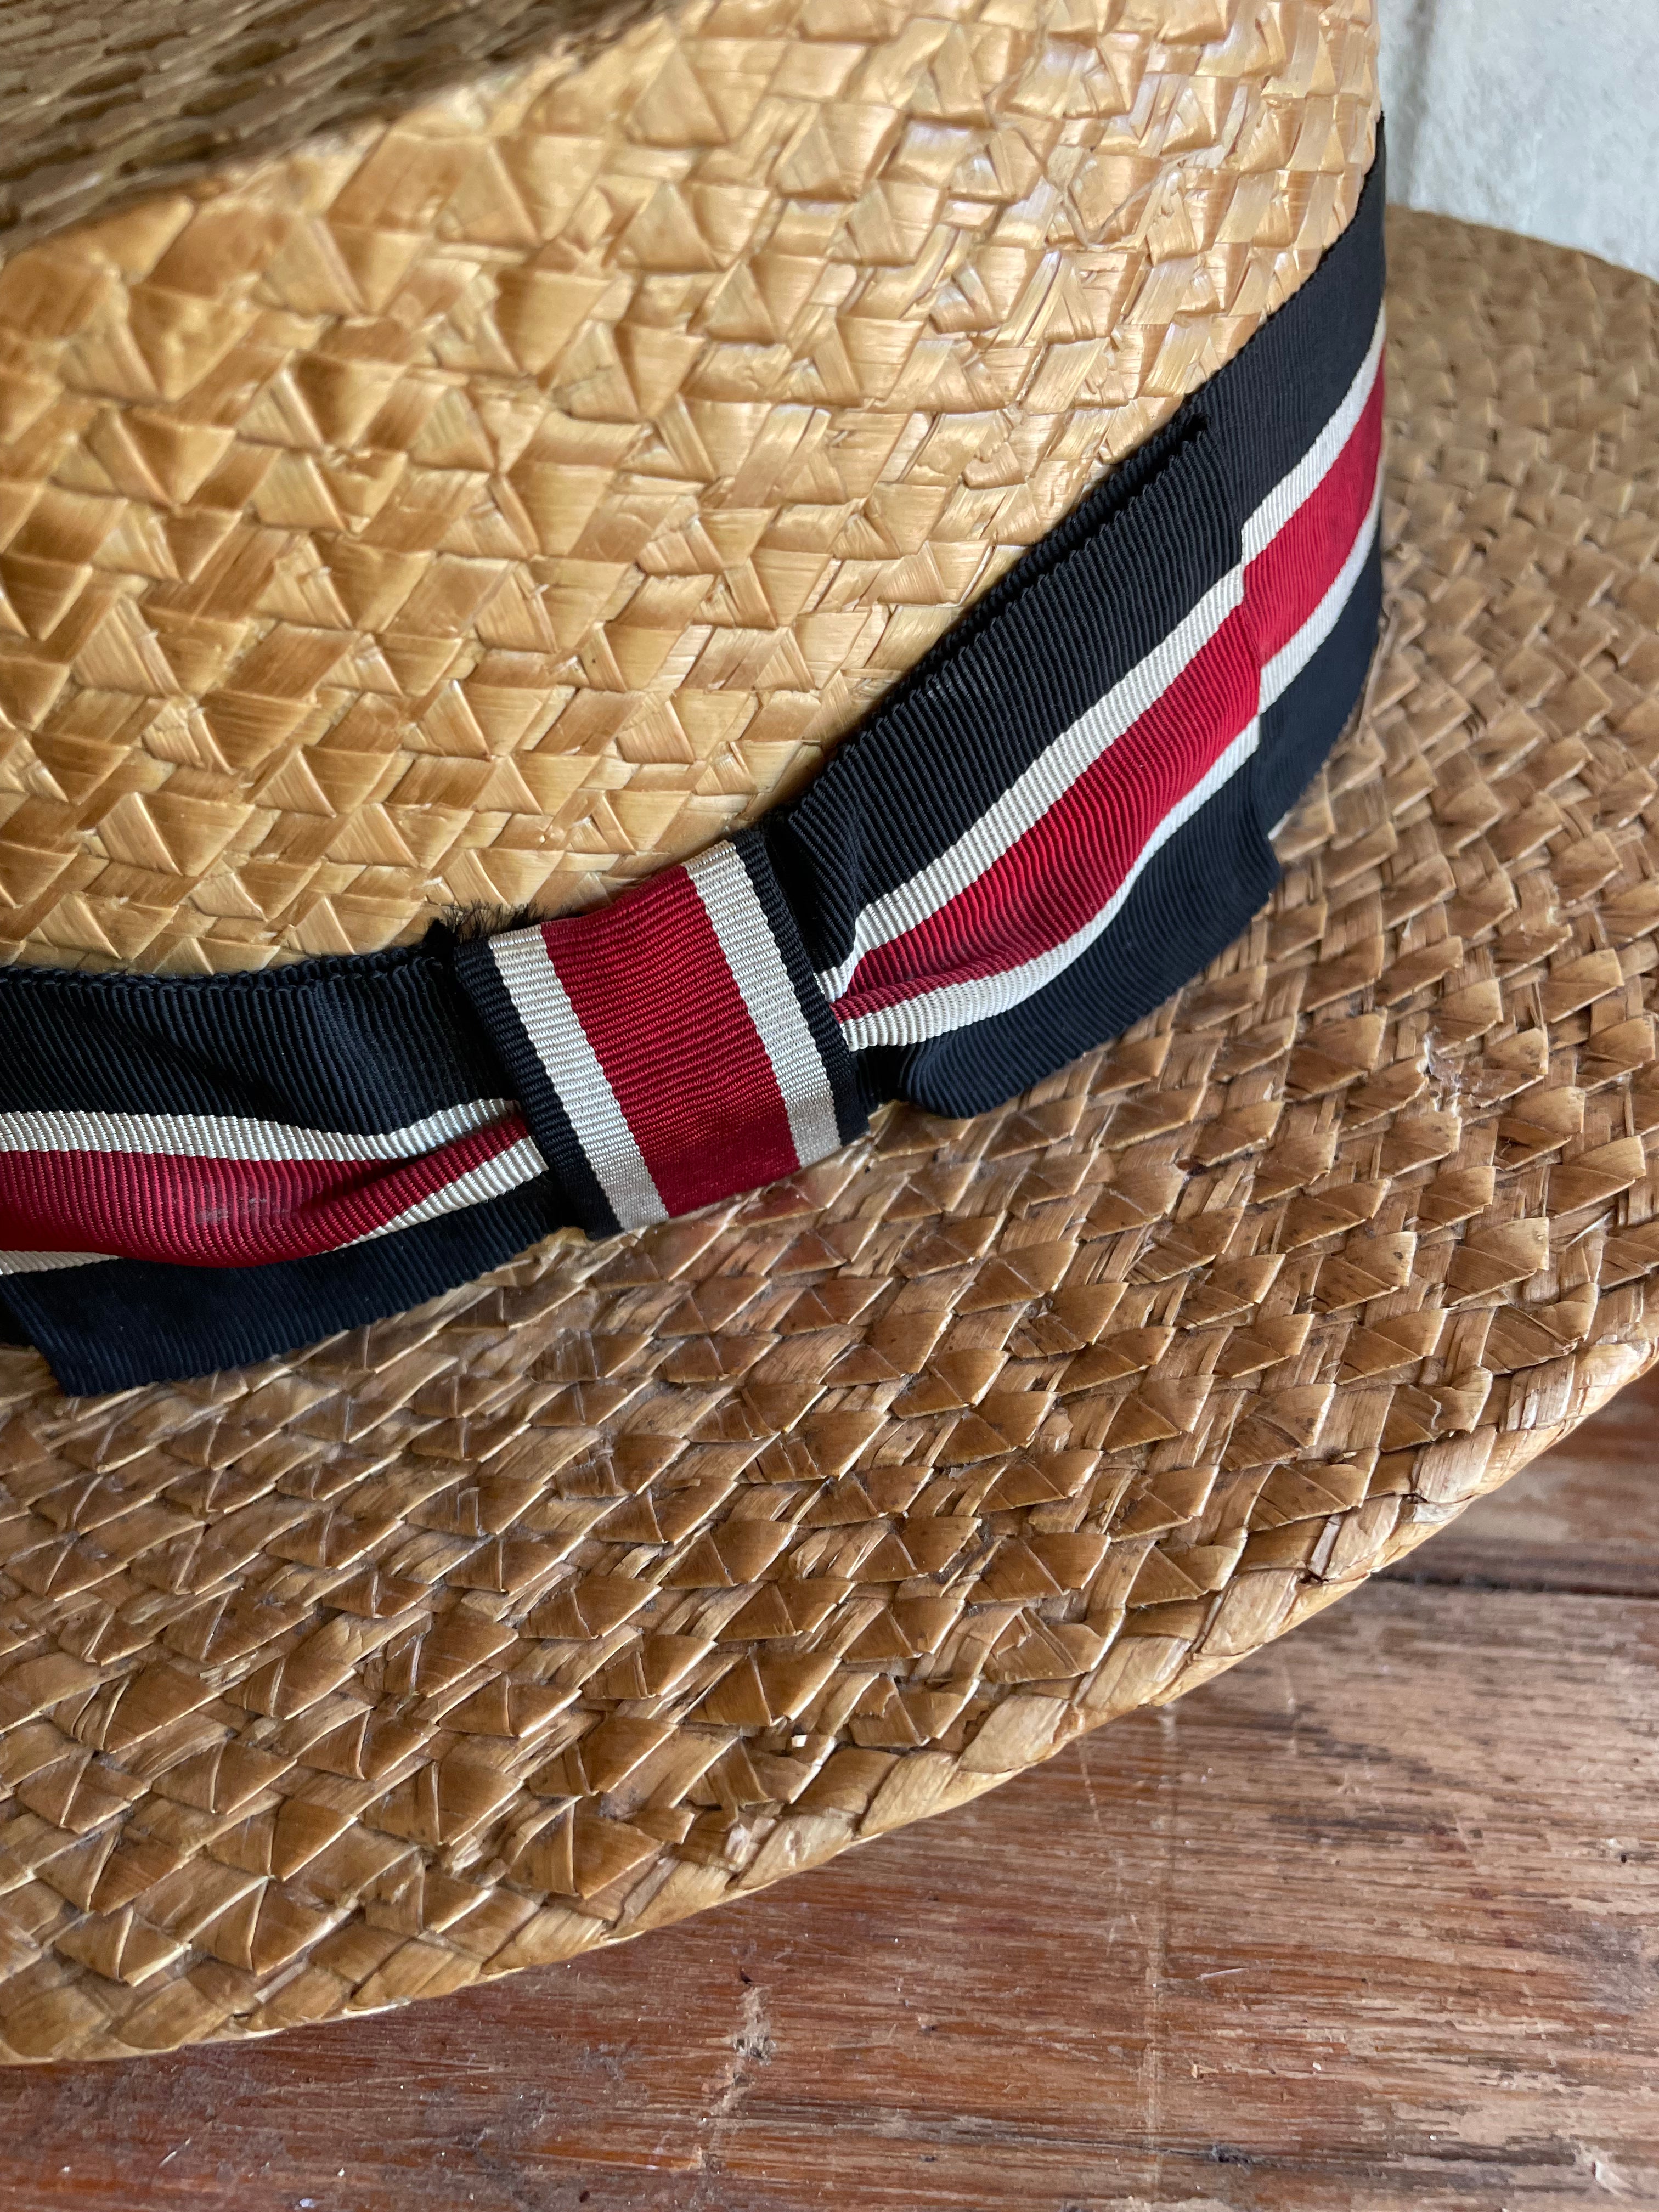 1930s Straw Boater Hat with Grosgrain Ribbon